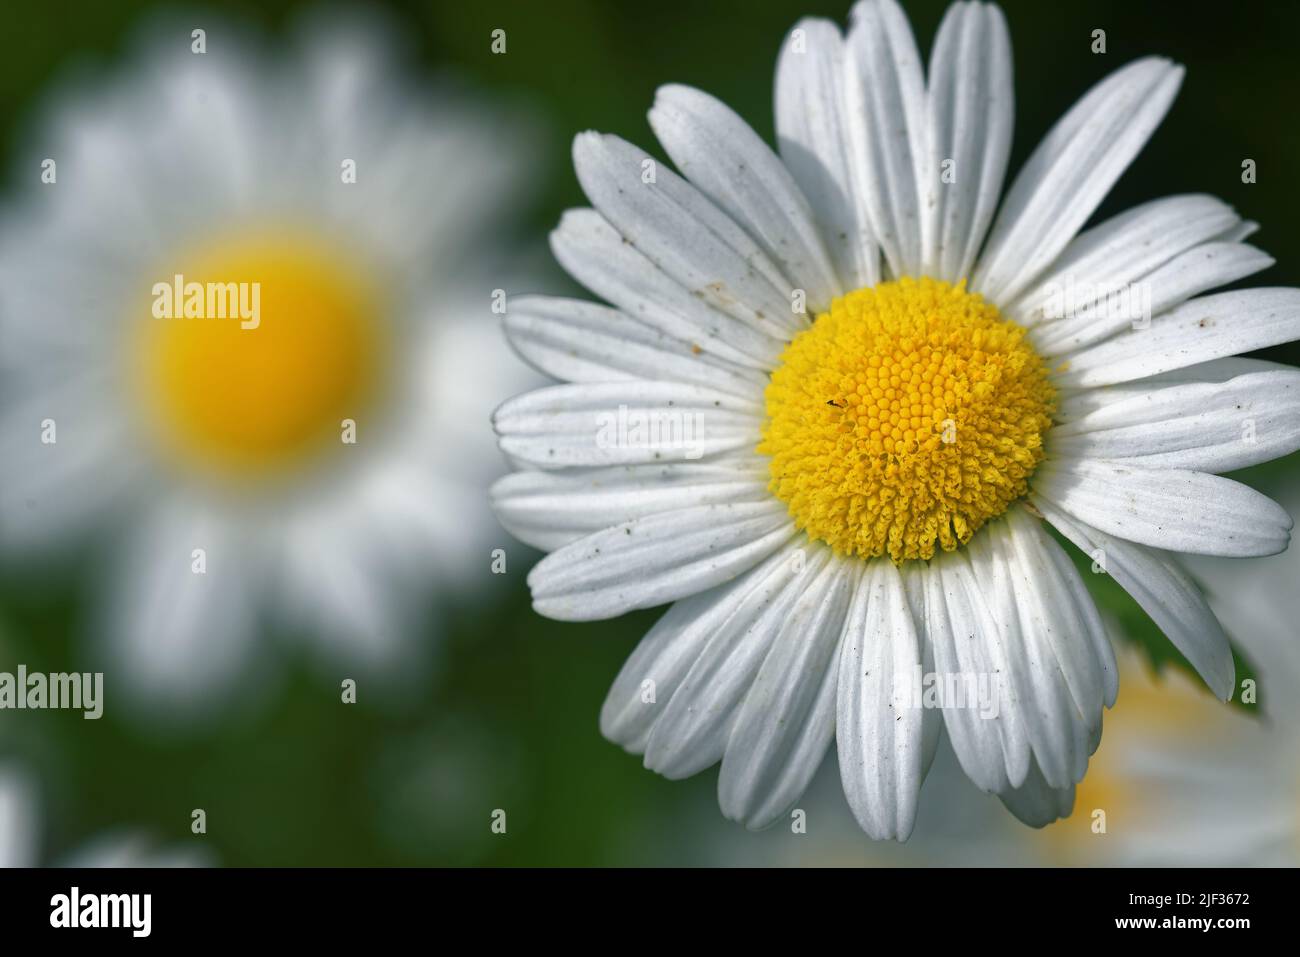 Leucanthemum vulgare, commonly known as the ox-eye daisy, oxeye daisy, dog daisy, marguerite  is a widespread flowering plant. Stock Photo